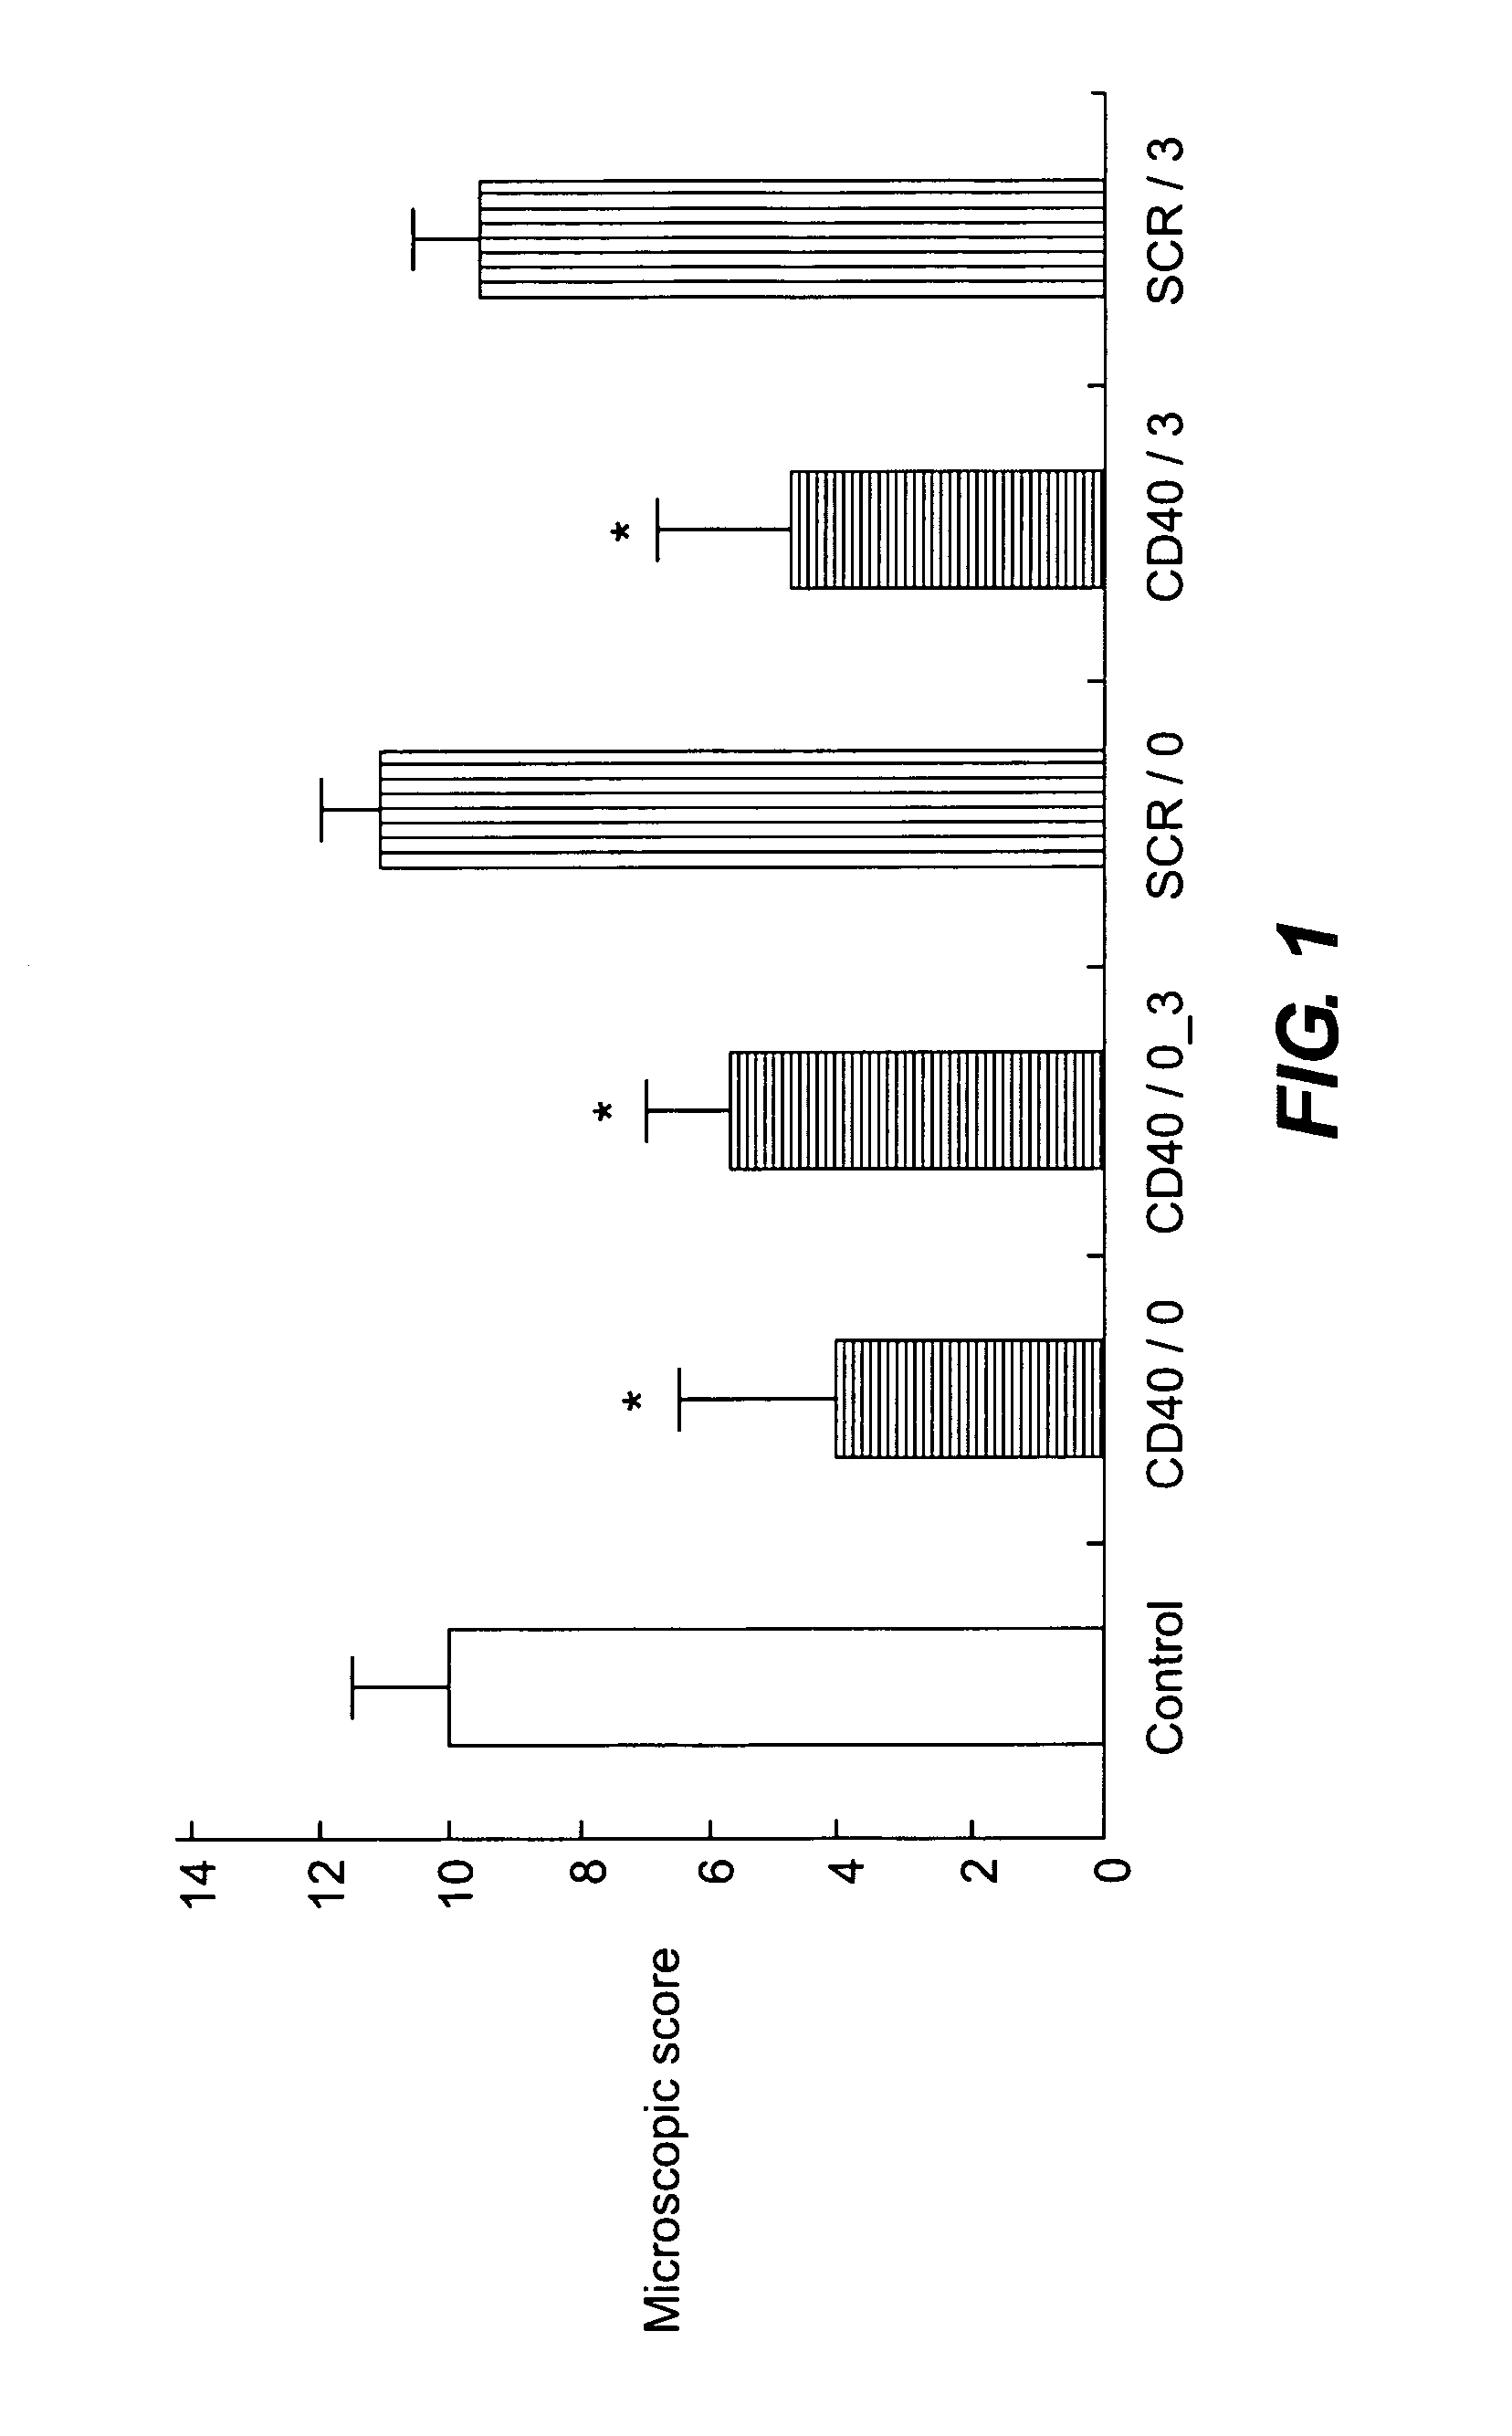 Pharmaceutical compositions comprising an oligonucleotide as an active agent